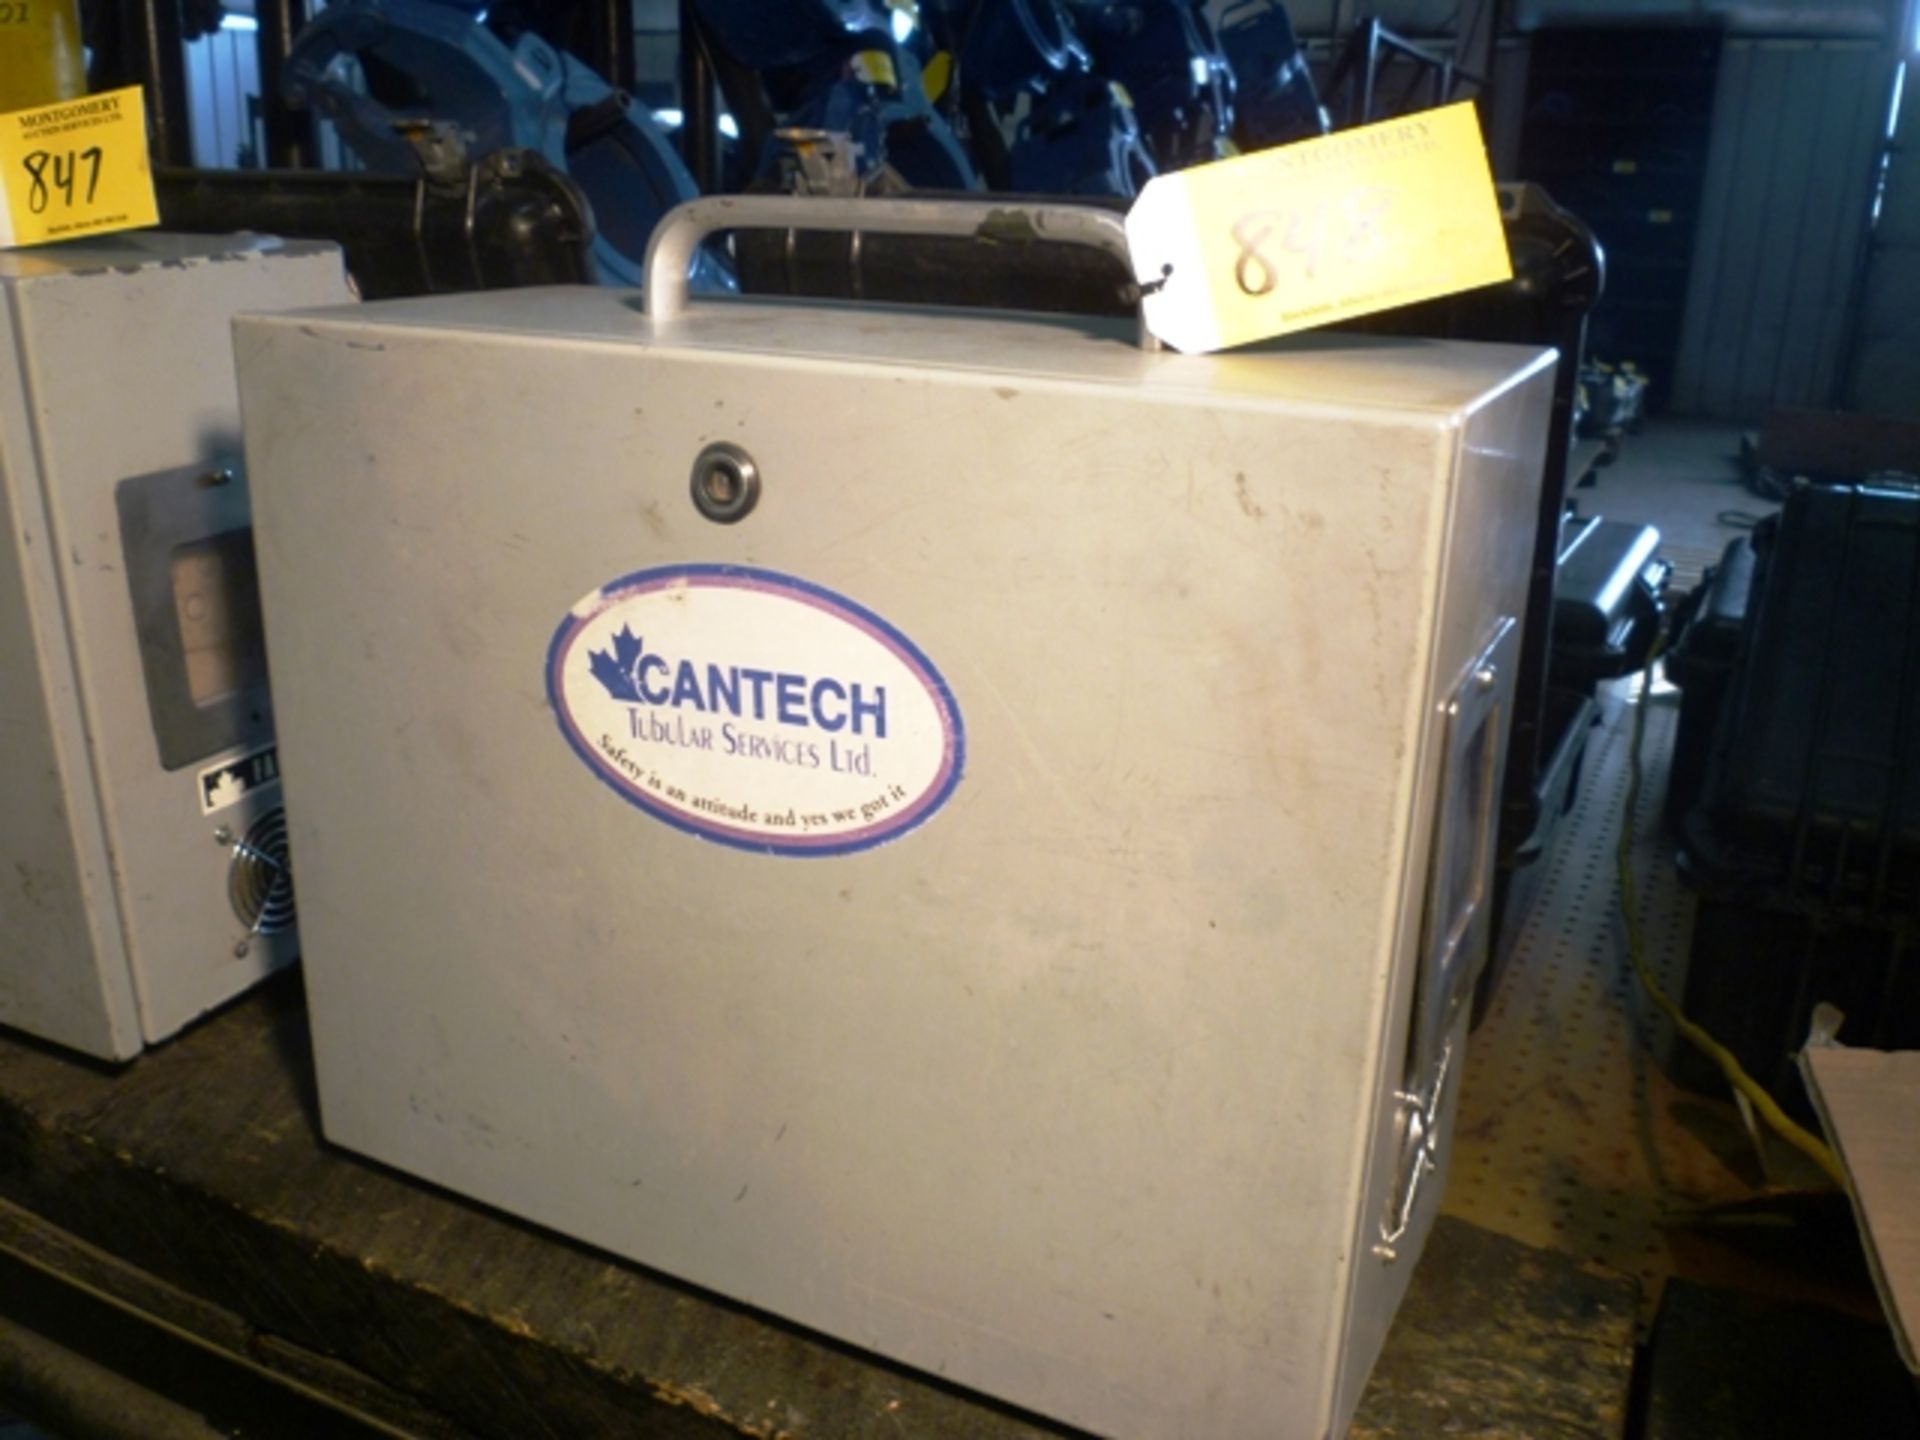 BATTERY BACKUP SURGE PROTECTOR FOR WINCATT SYSTEM (NEEDS NEW BATTERY)